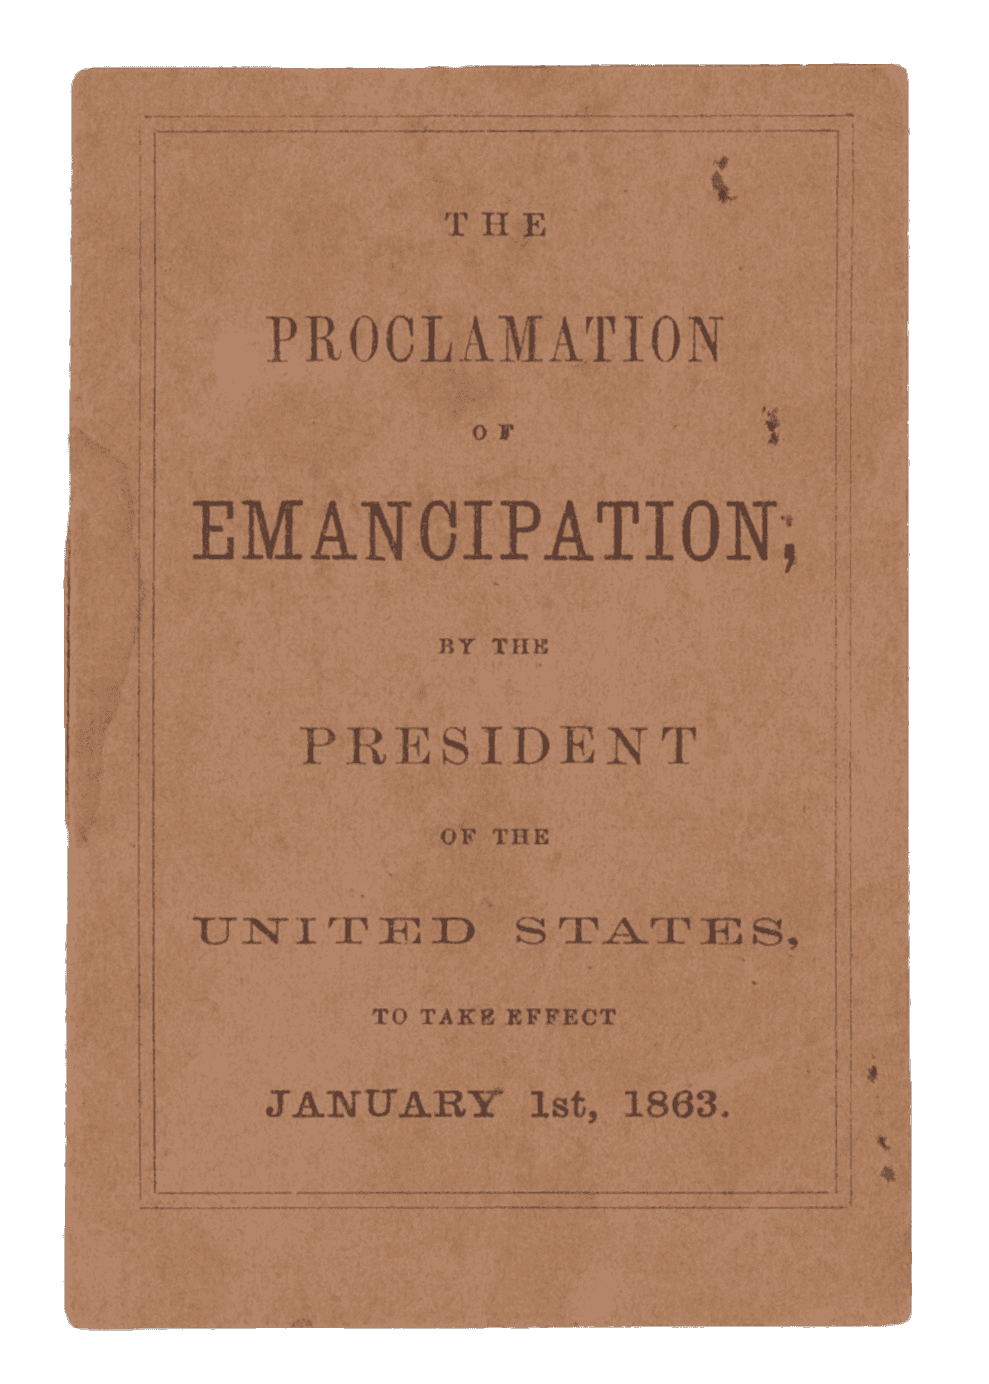 A miniature pamphlet containing the text of the Emancipation Proclamation, dated January 1st, 1863.